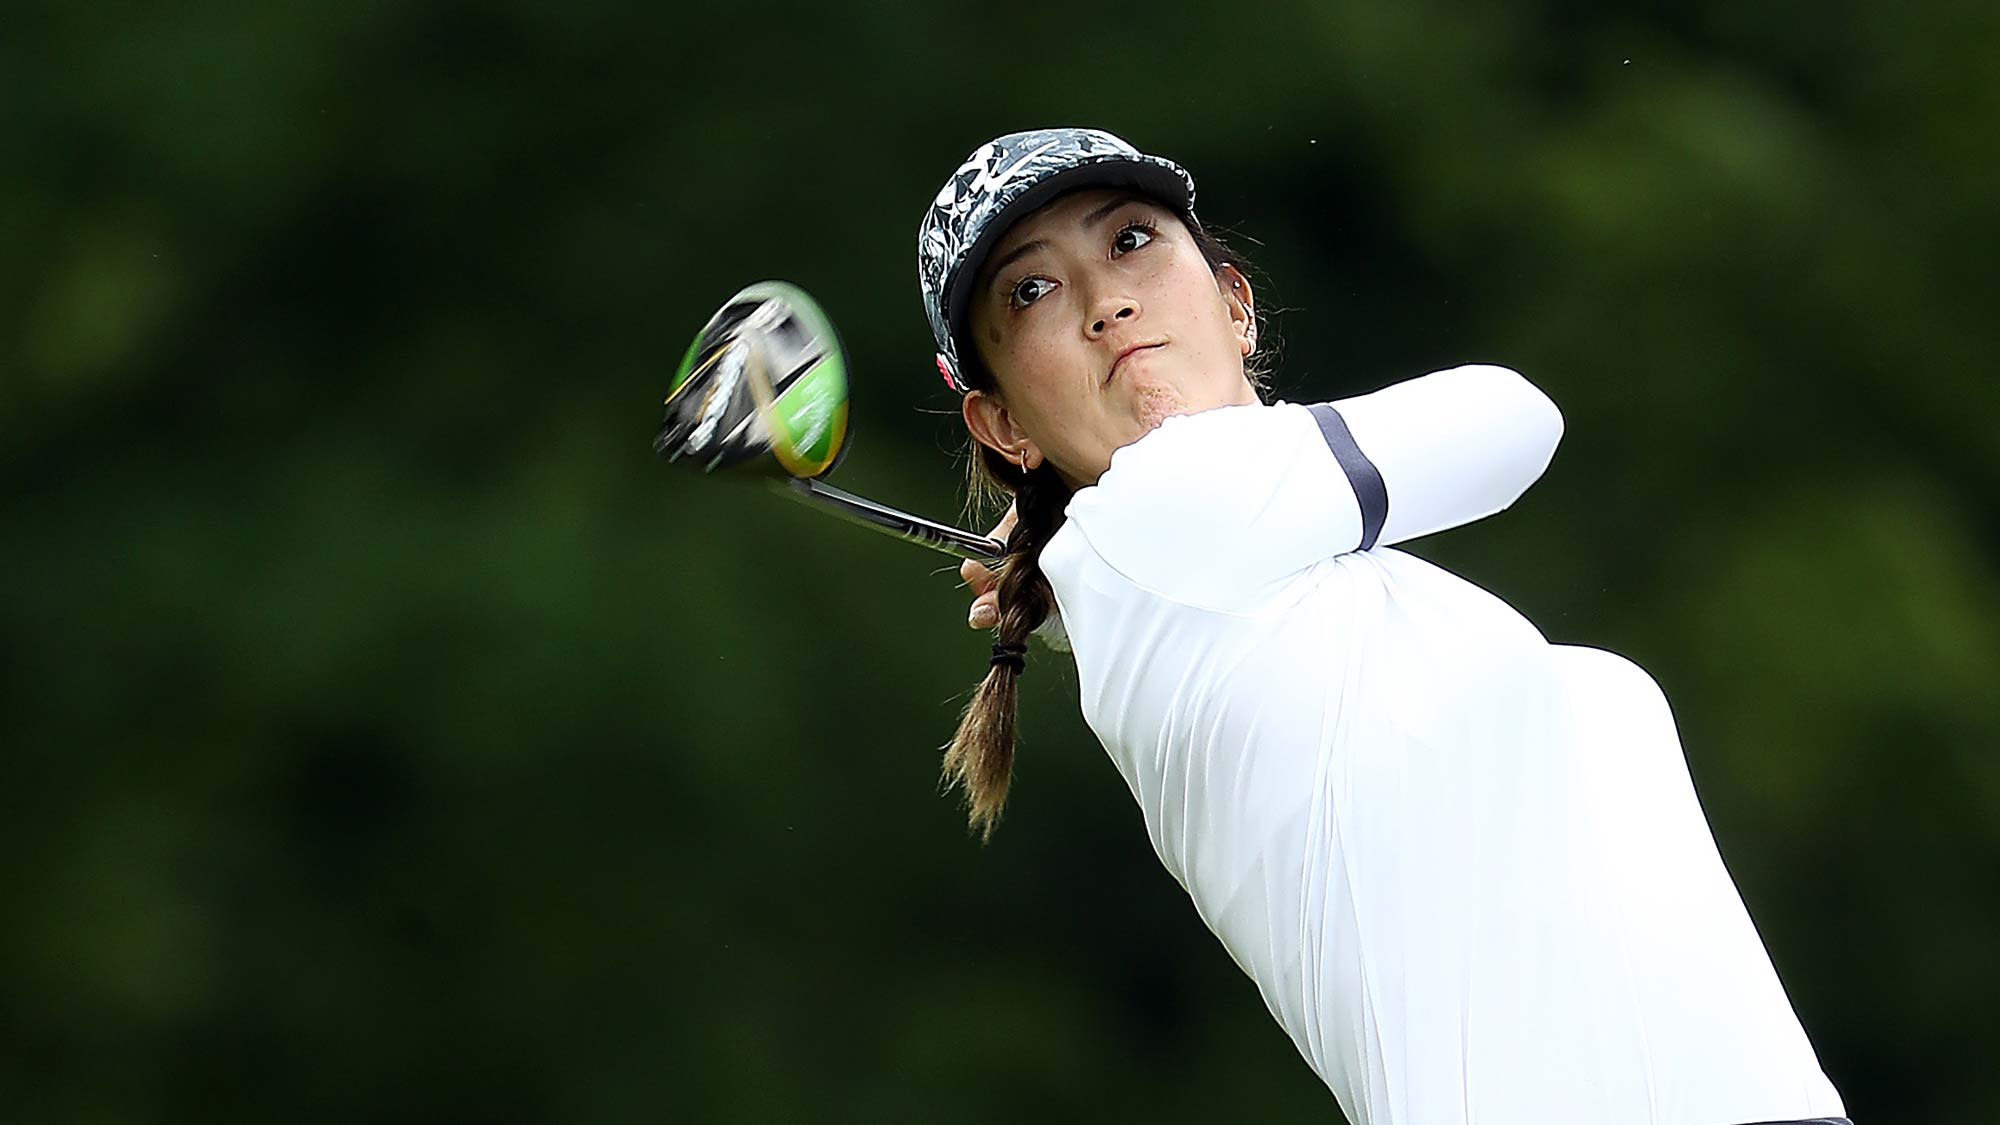 Michelle Wie hits her first shot on the 15th hole during the first round of the KPMG Women's PGA Championship